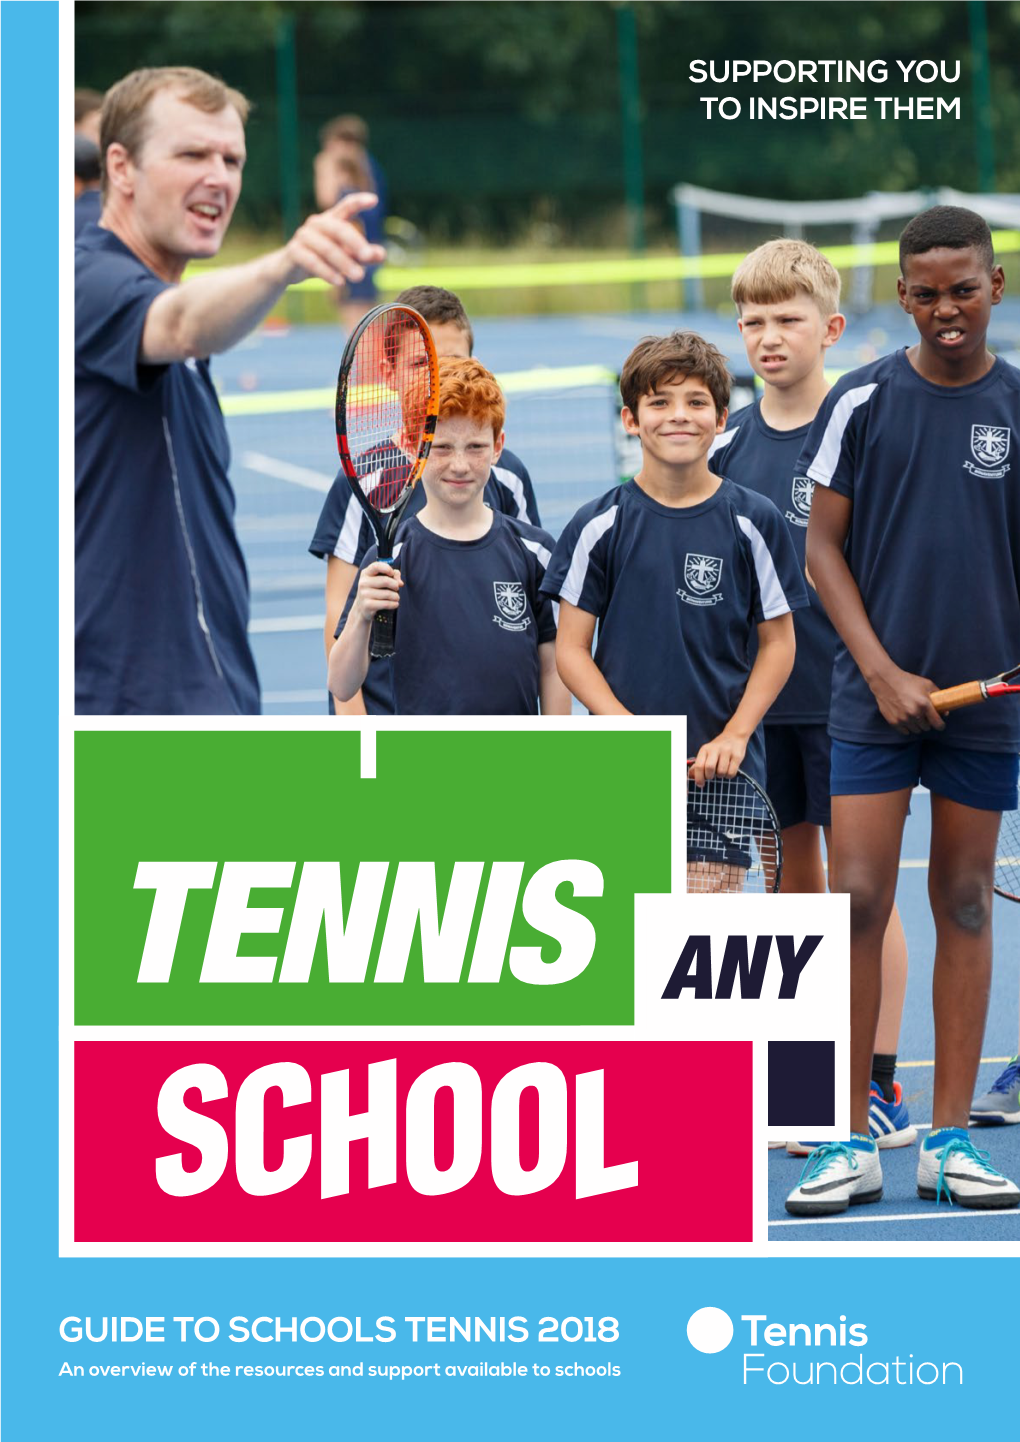 GUIDE to SCHOOLS TENNIS 2018 an Overview of the Resources and Support Available to Schools the Guide to Schools Tennis 2018